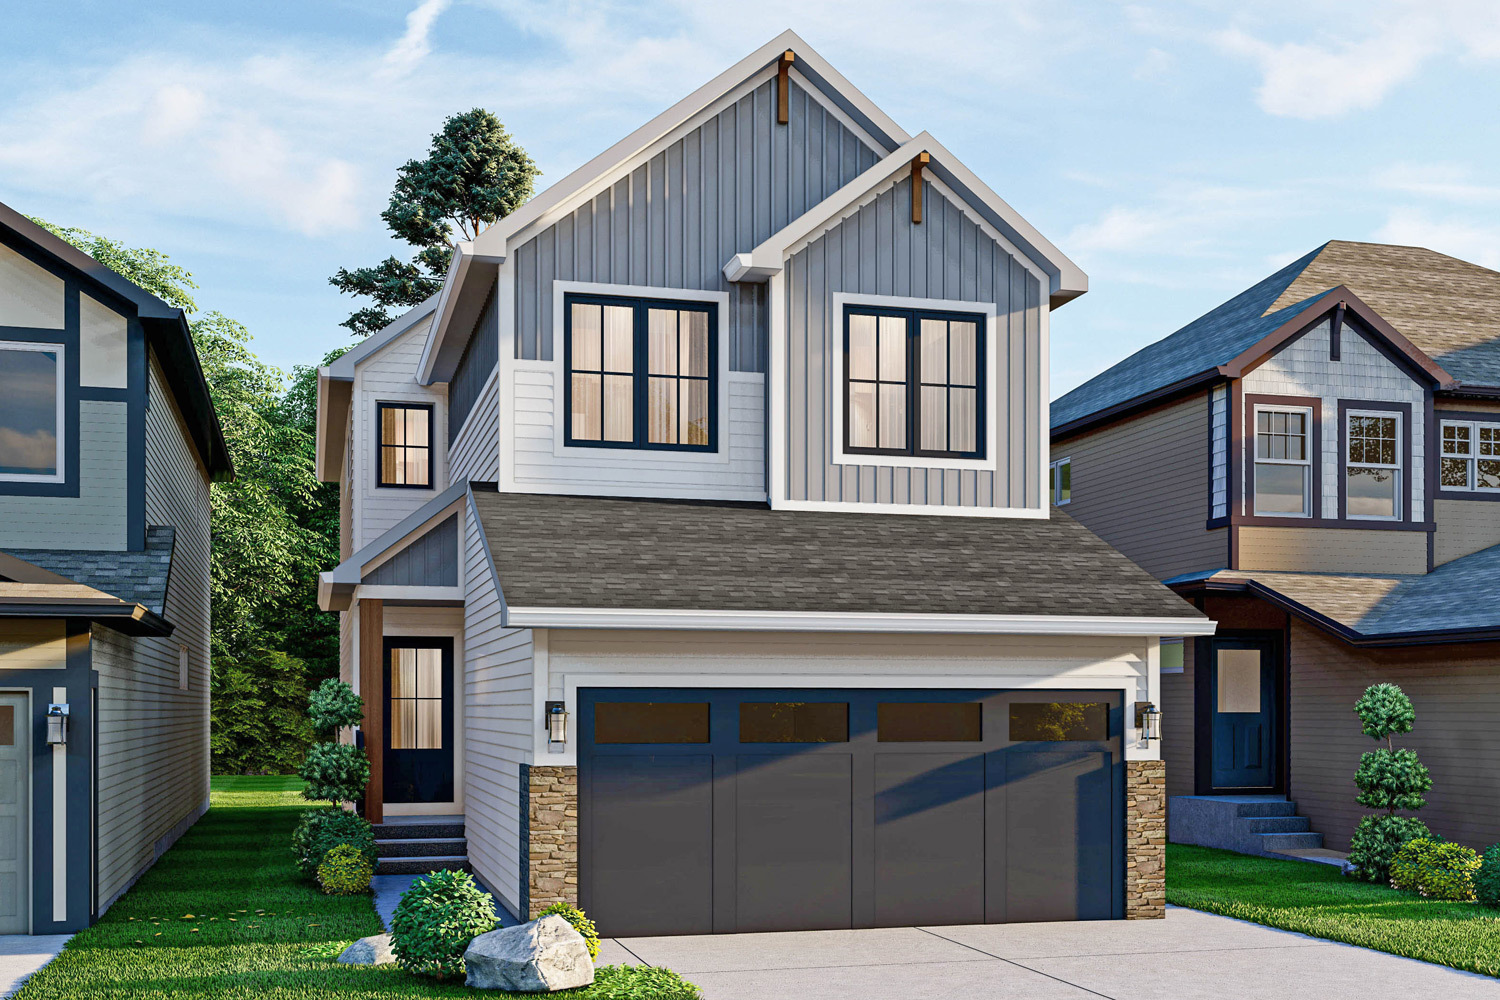 Exterior render lakeview